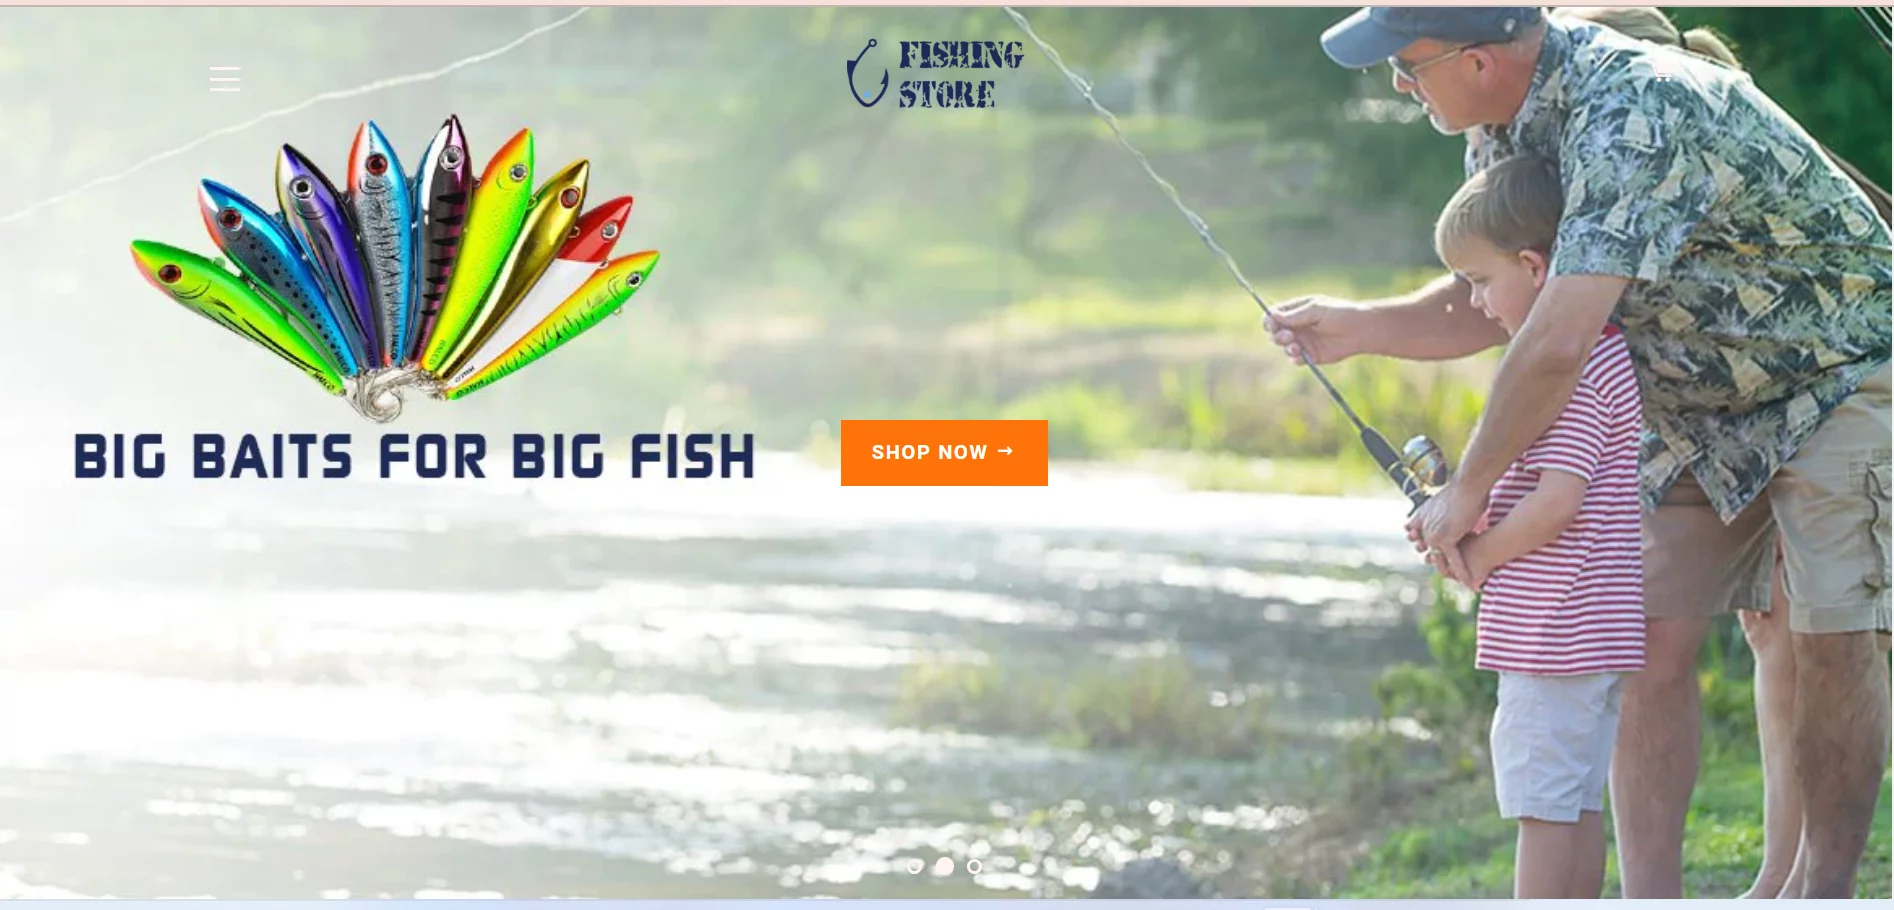 Where you can find the Best Premade Shopify Fishing Accessories Store?